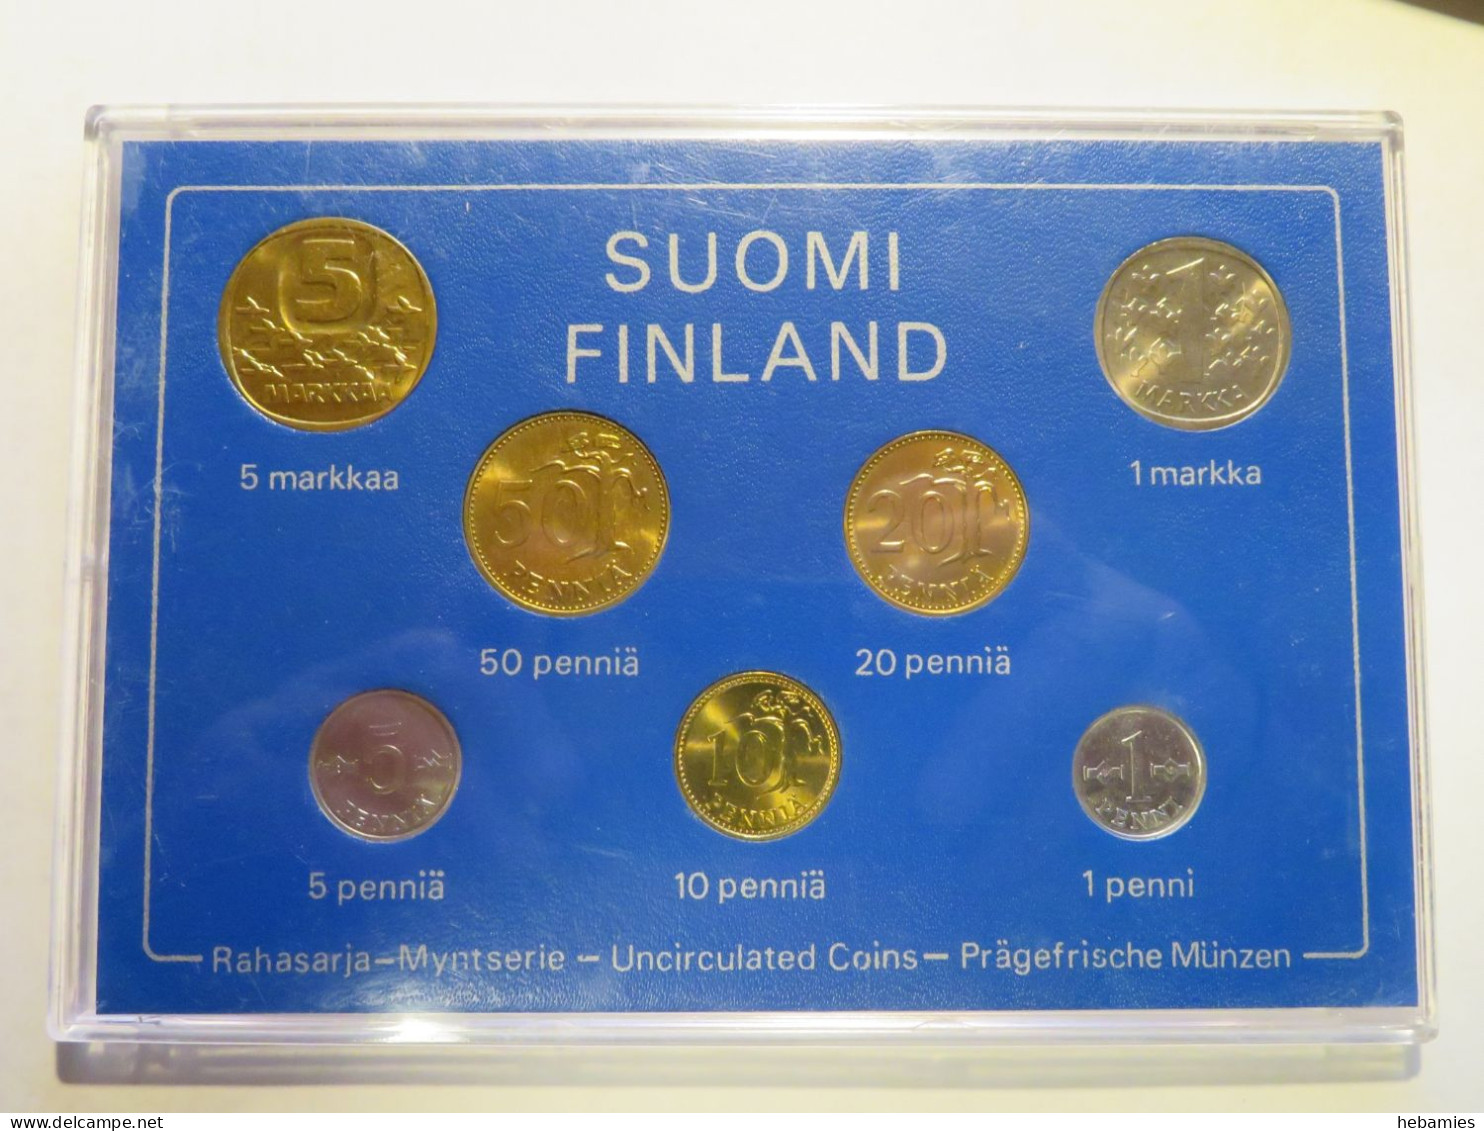 The Mint Of Finland Official Coin Set Year 1979 - In ORIGINAL CASE And MINT CONDITION - - Finlande